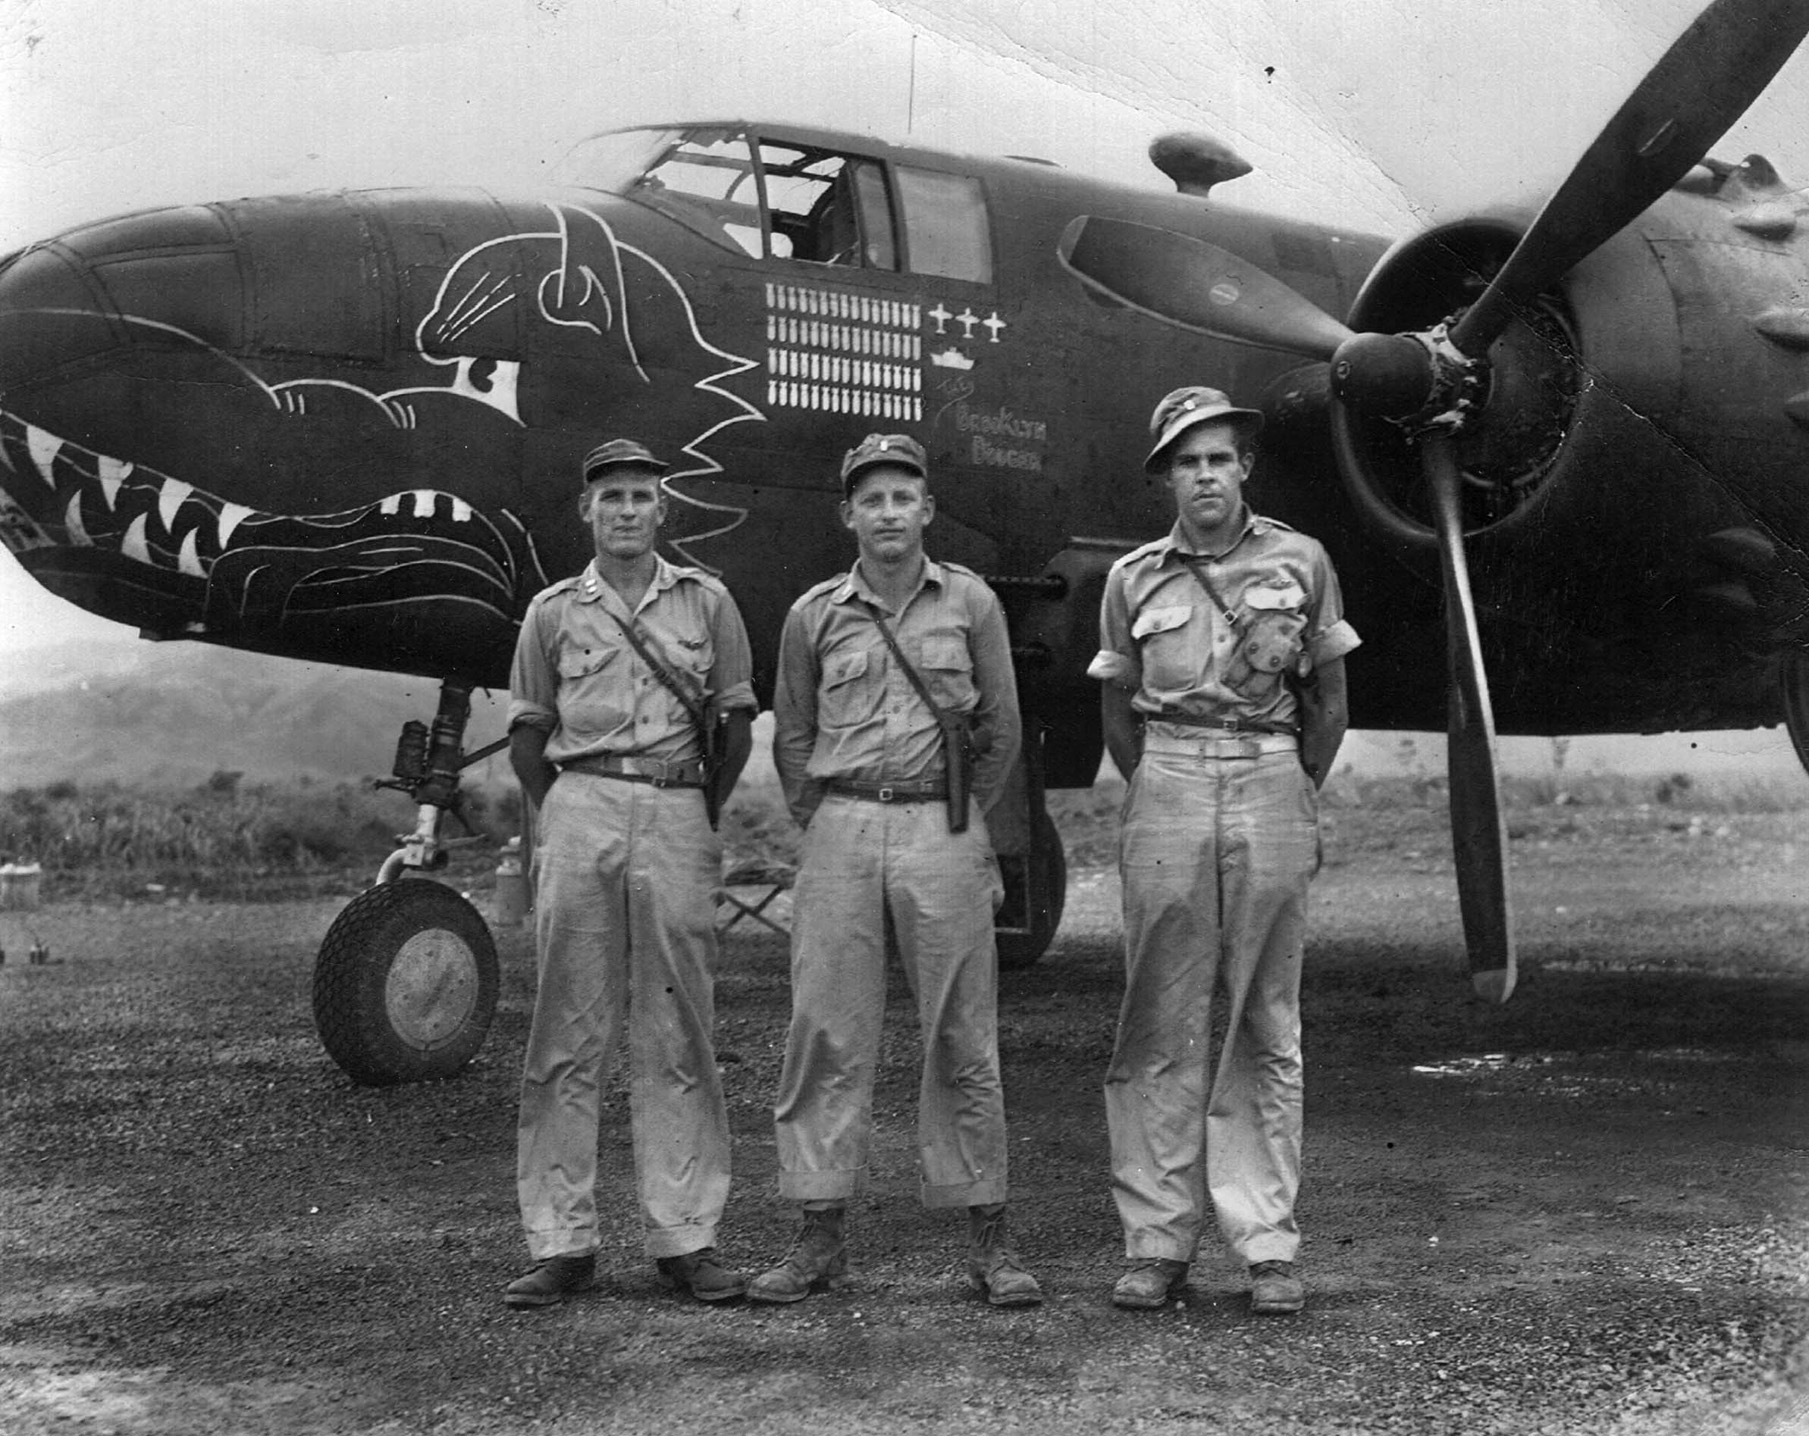 After their narrow escape from death in the Kavieng raid of February 15, 1944, survivors from the B-25 medium bomber nicknamed Pissonit pose for a photographer. The trio includes, left to right, Lieutenant Eugene Benson, Lieutenant Hollie Rushing, and Lieutenant William J. Smith.